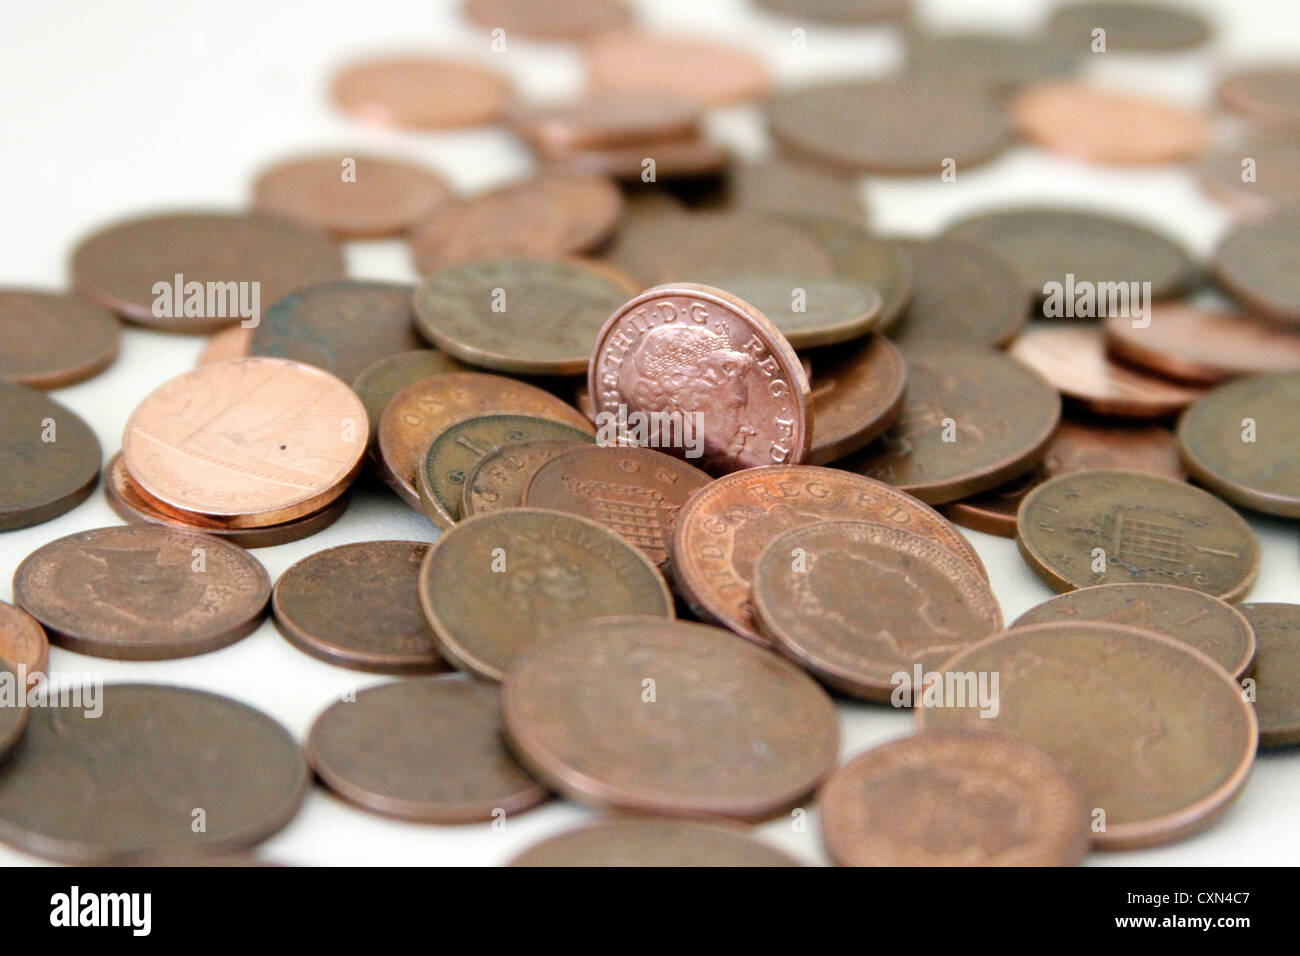 1 Penny shiny coin among other UK Copper coins Stock Photo